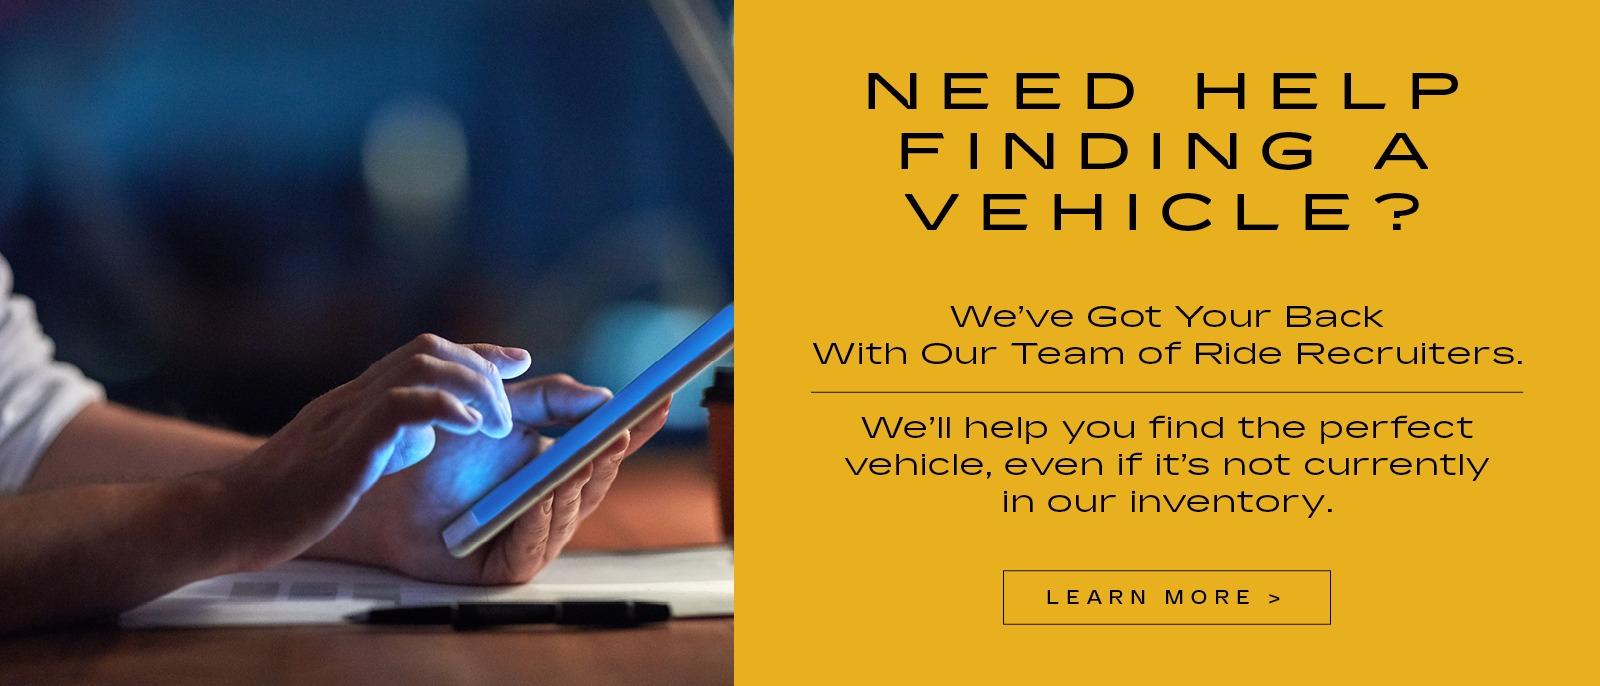 Need Help finidng a vehicle?
we got your back with out team of ride recruiters